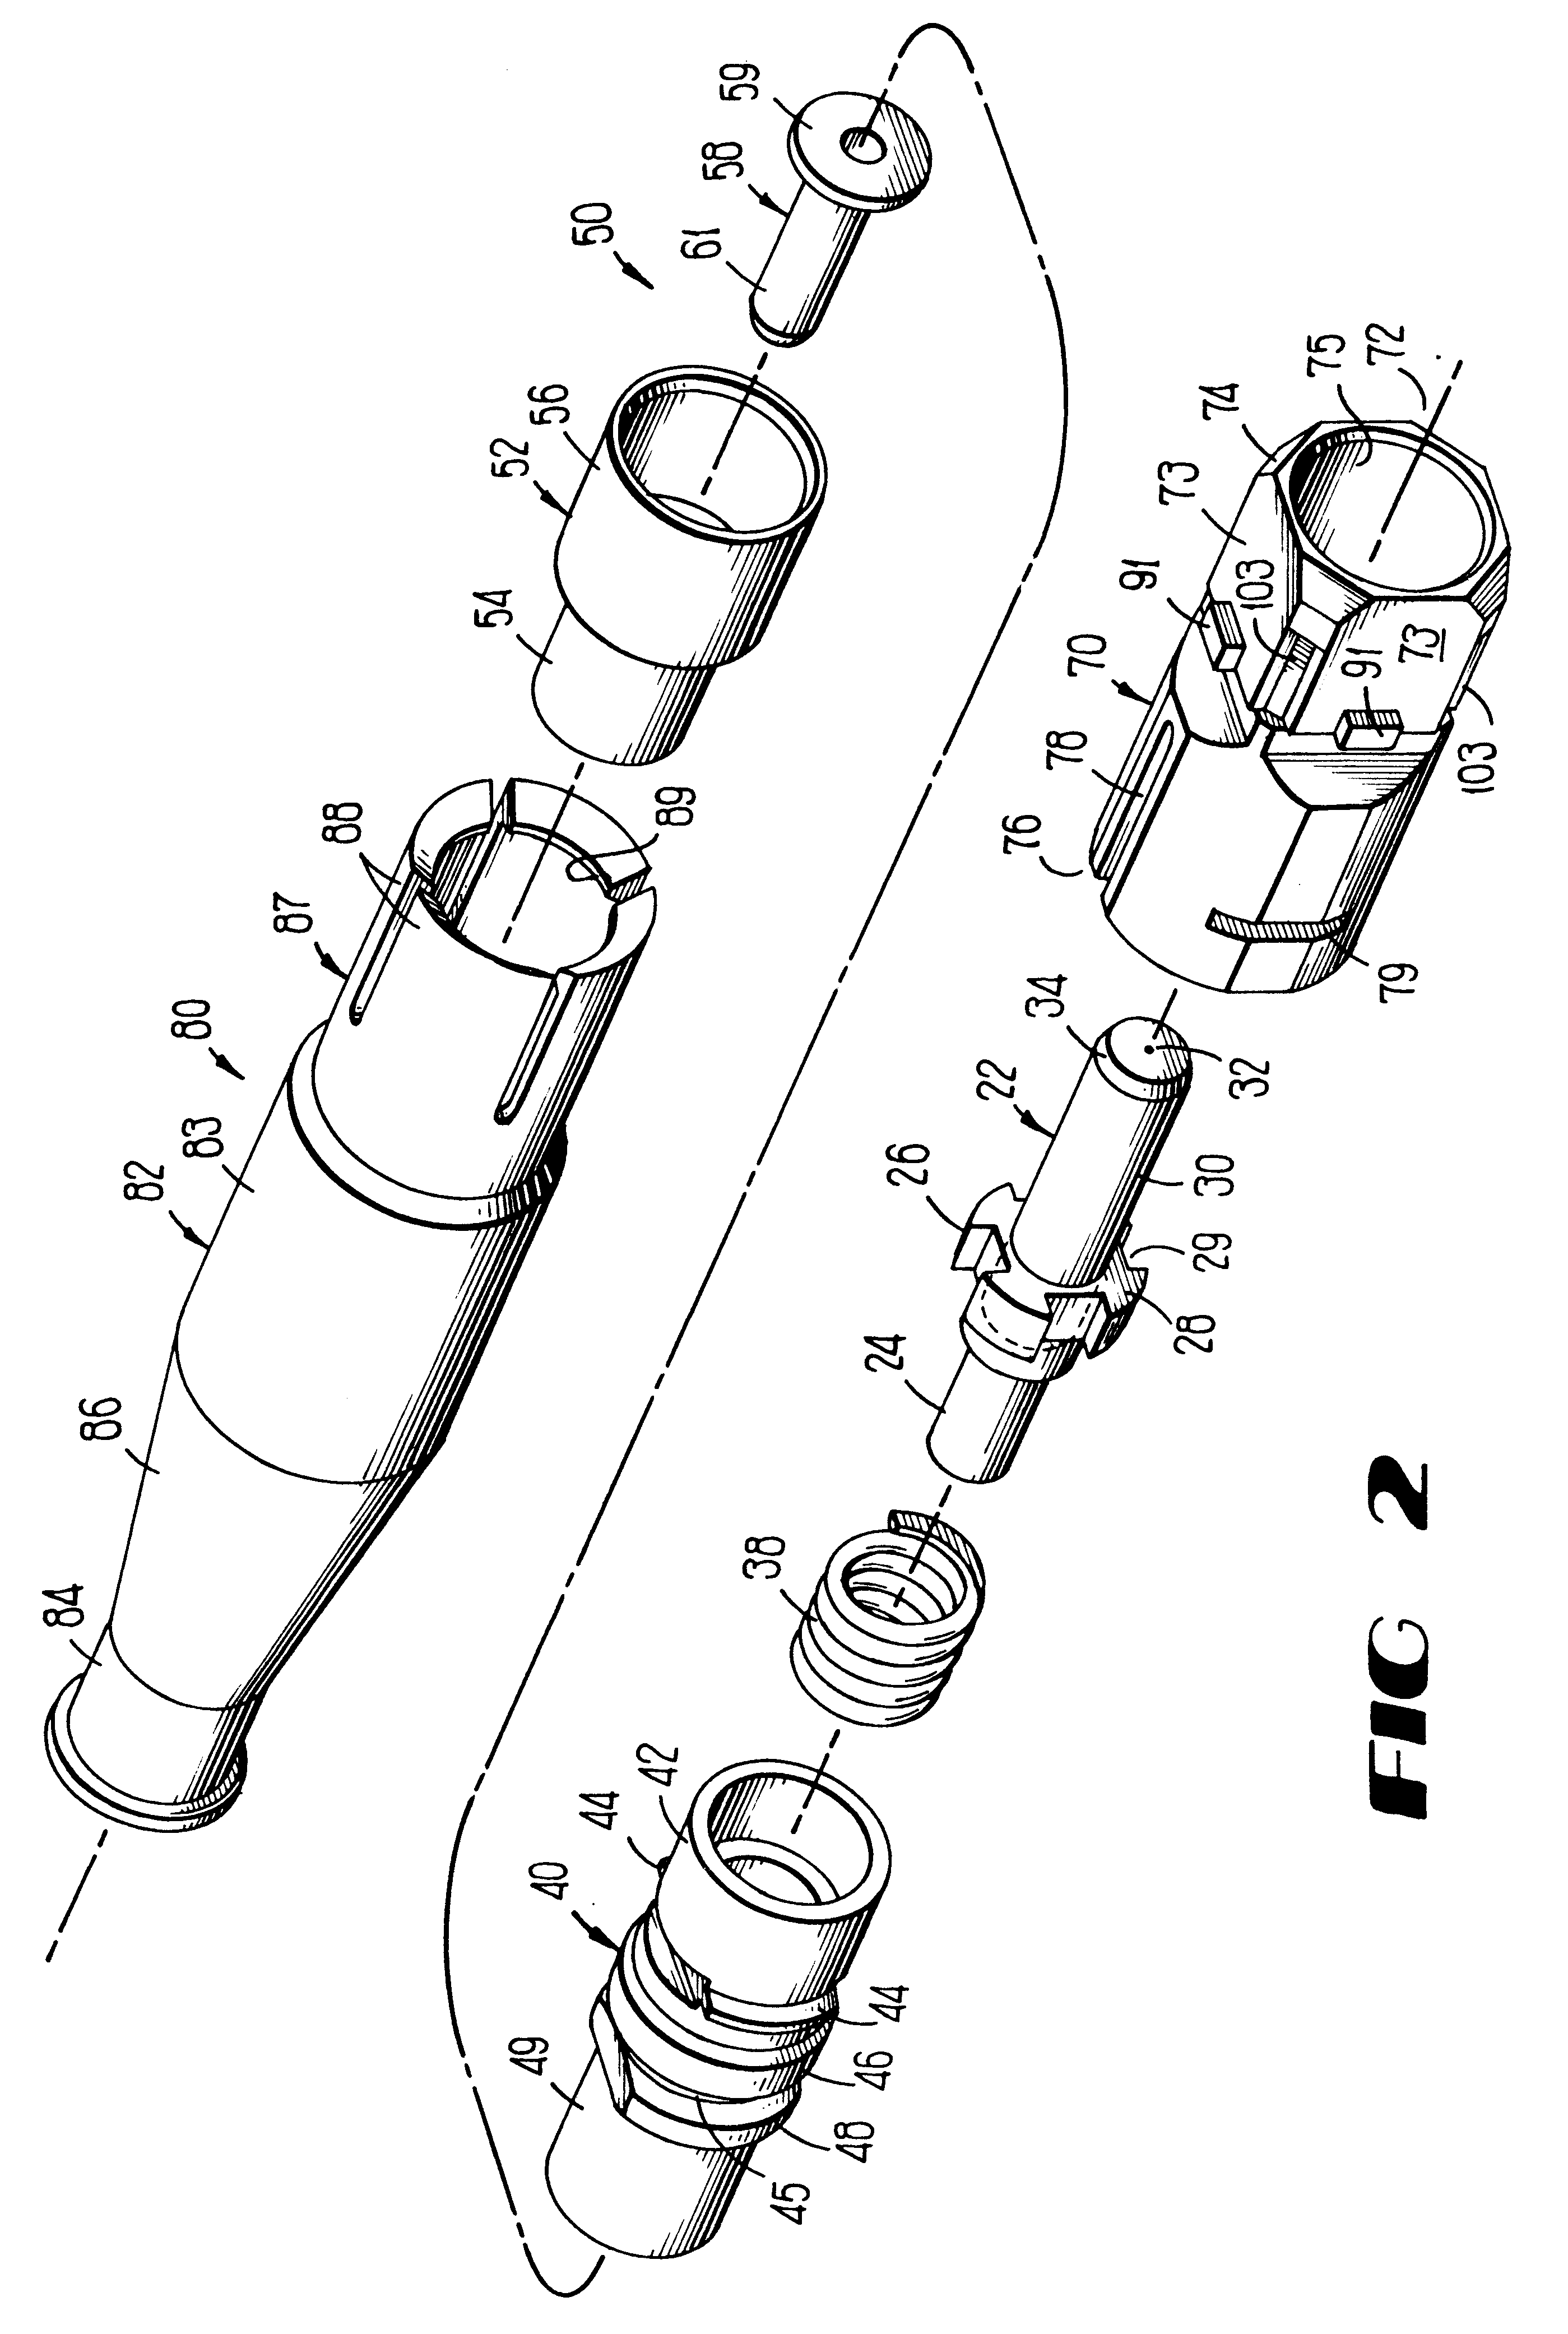 Optical fiber ferrule connector having enhanced provisions for tuning